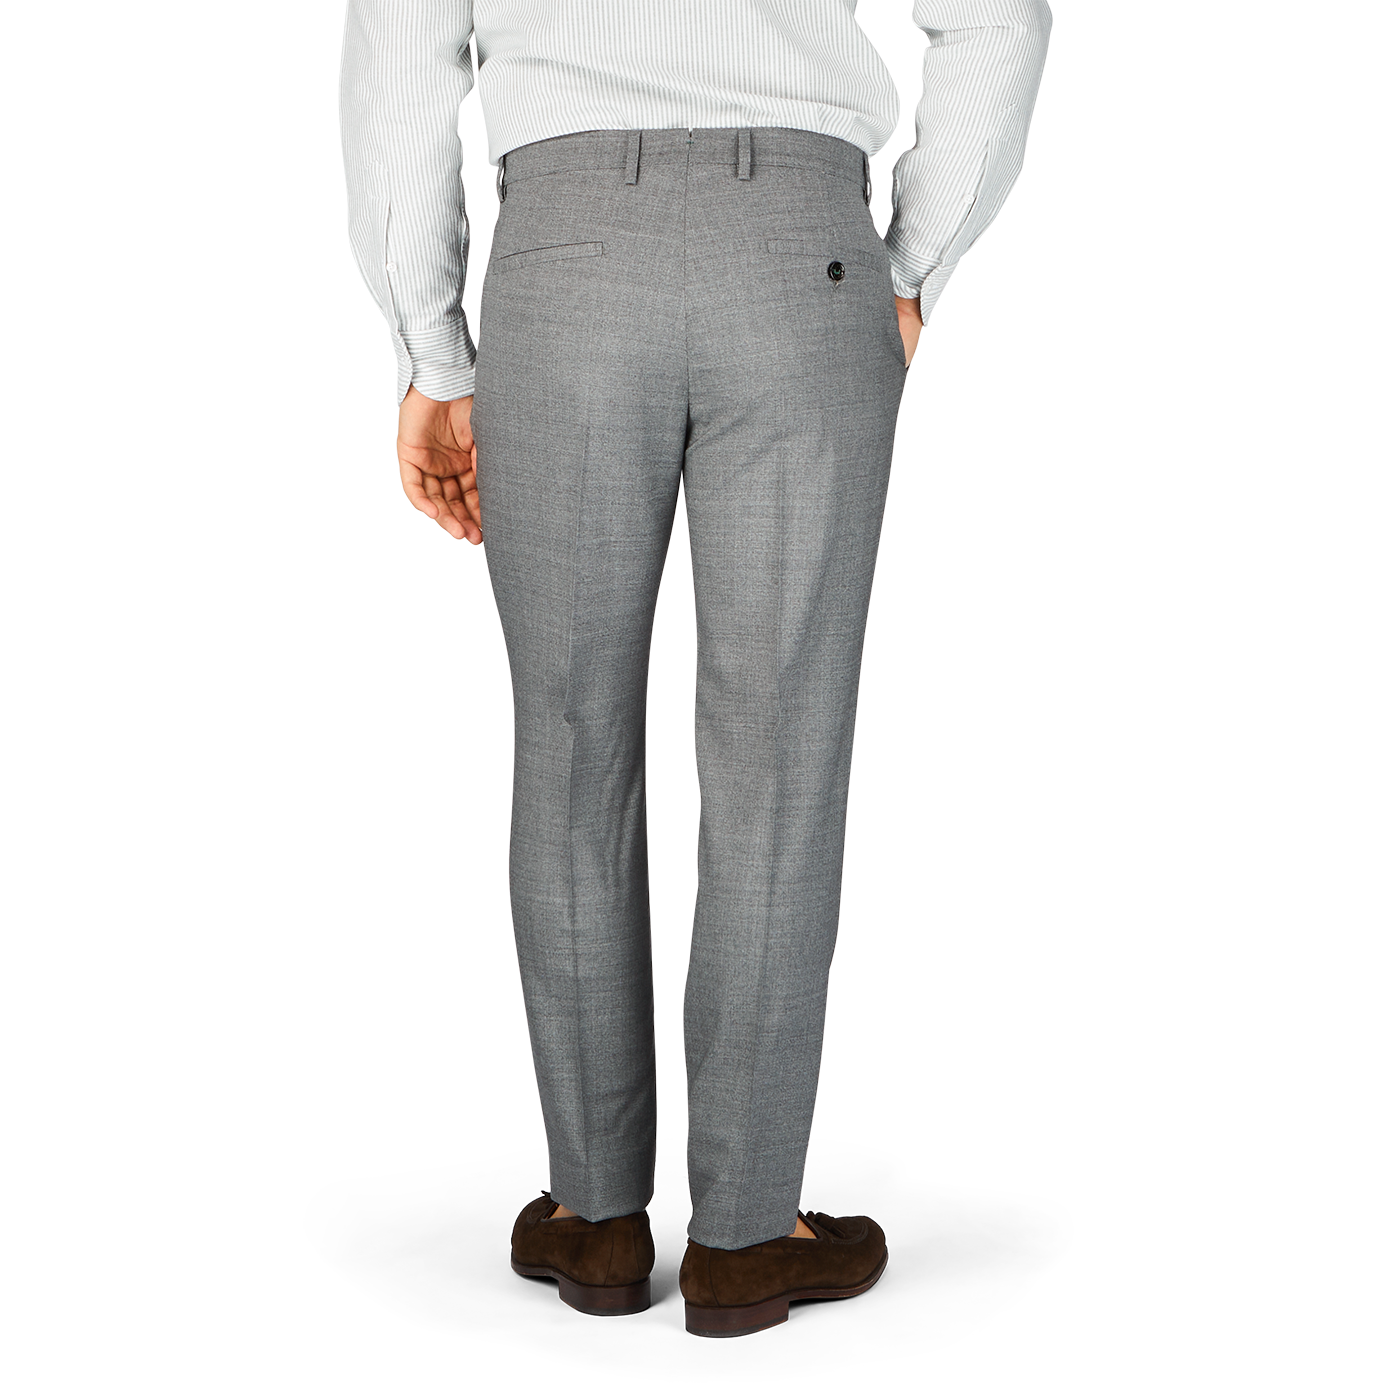 The man is seen in Berwich medium grey wool fresco flat front trousers, made of high-twist wool fabric and cut in a regular fit.